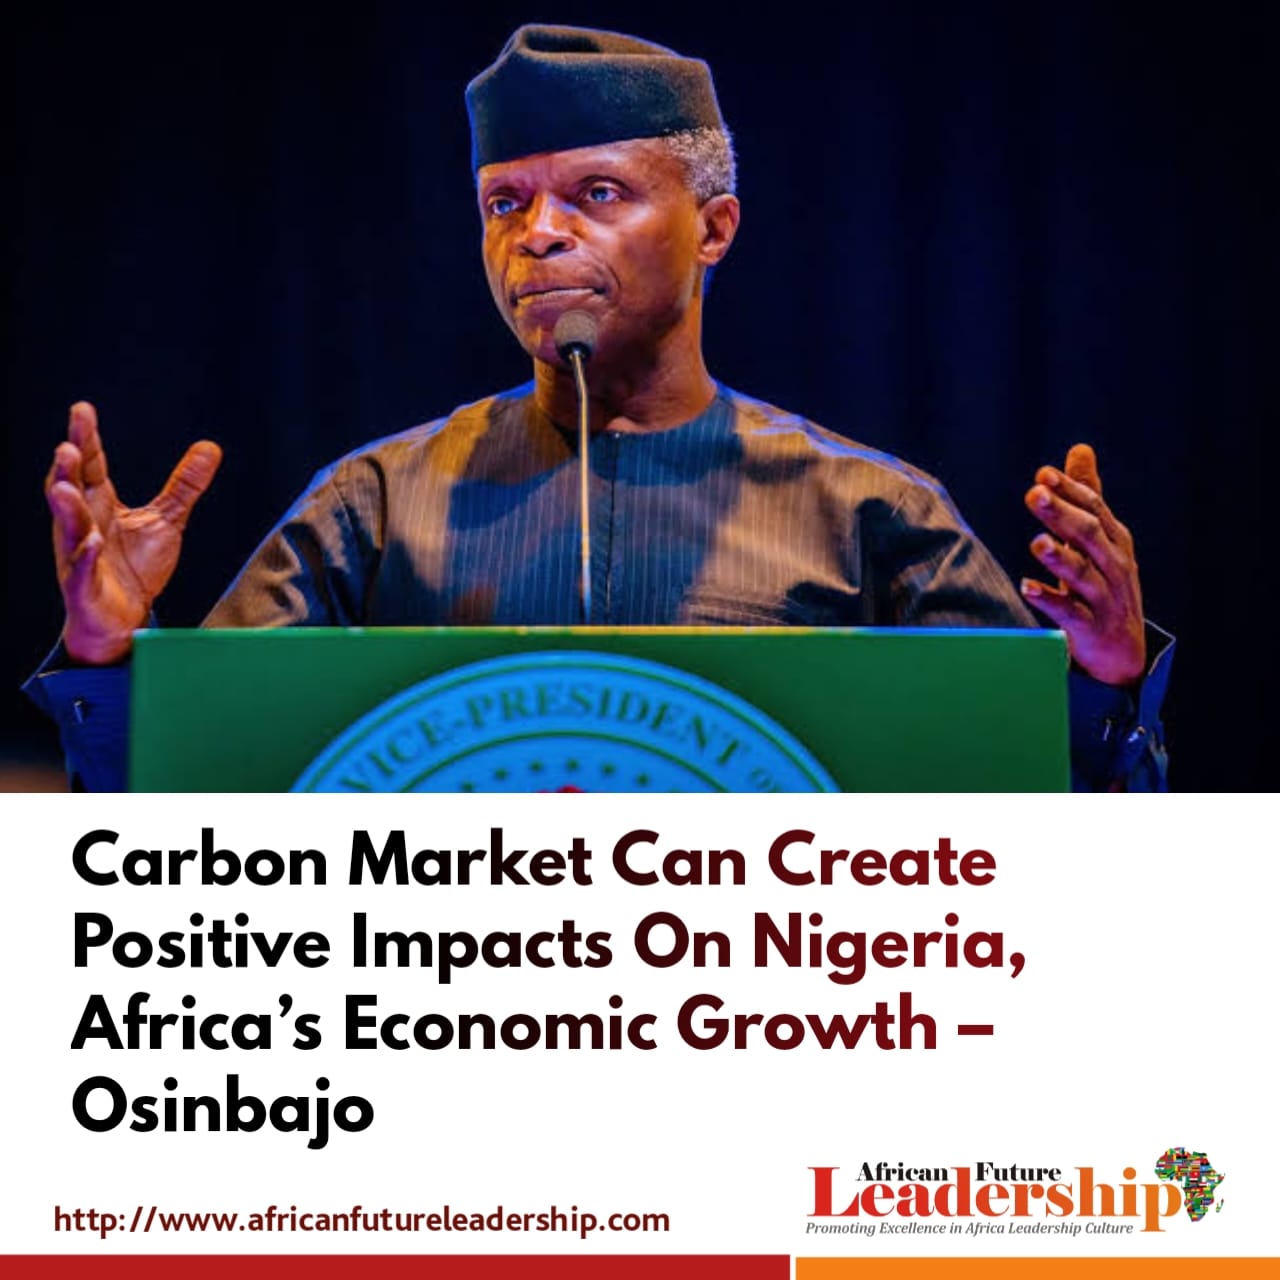 Carbon Market Can Create Positive Impacts On Nigeria, Africa’s Economic Growth – Osinbajo